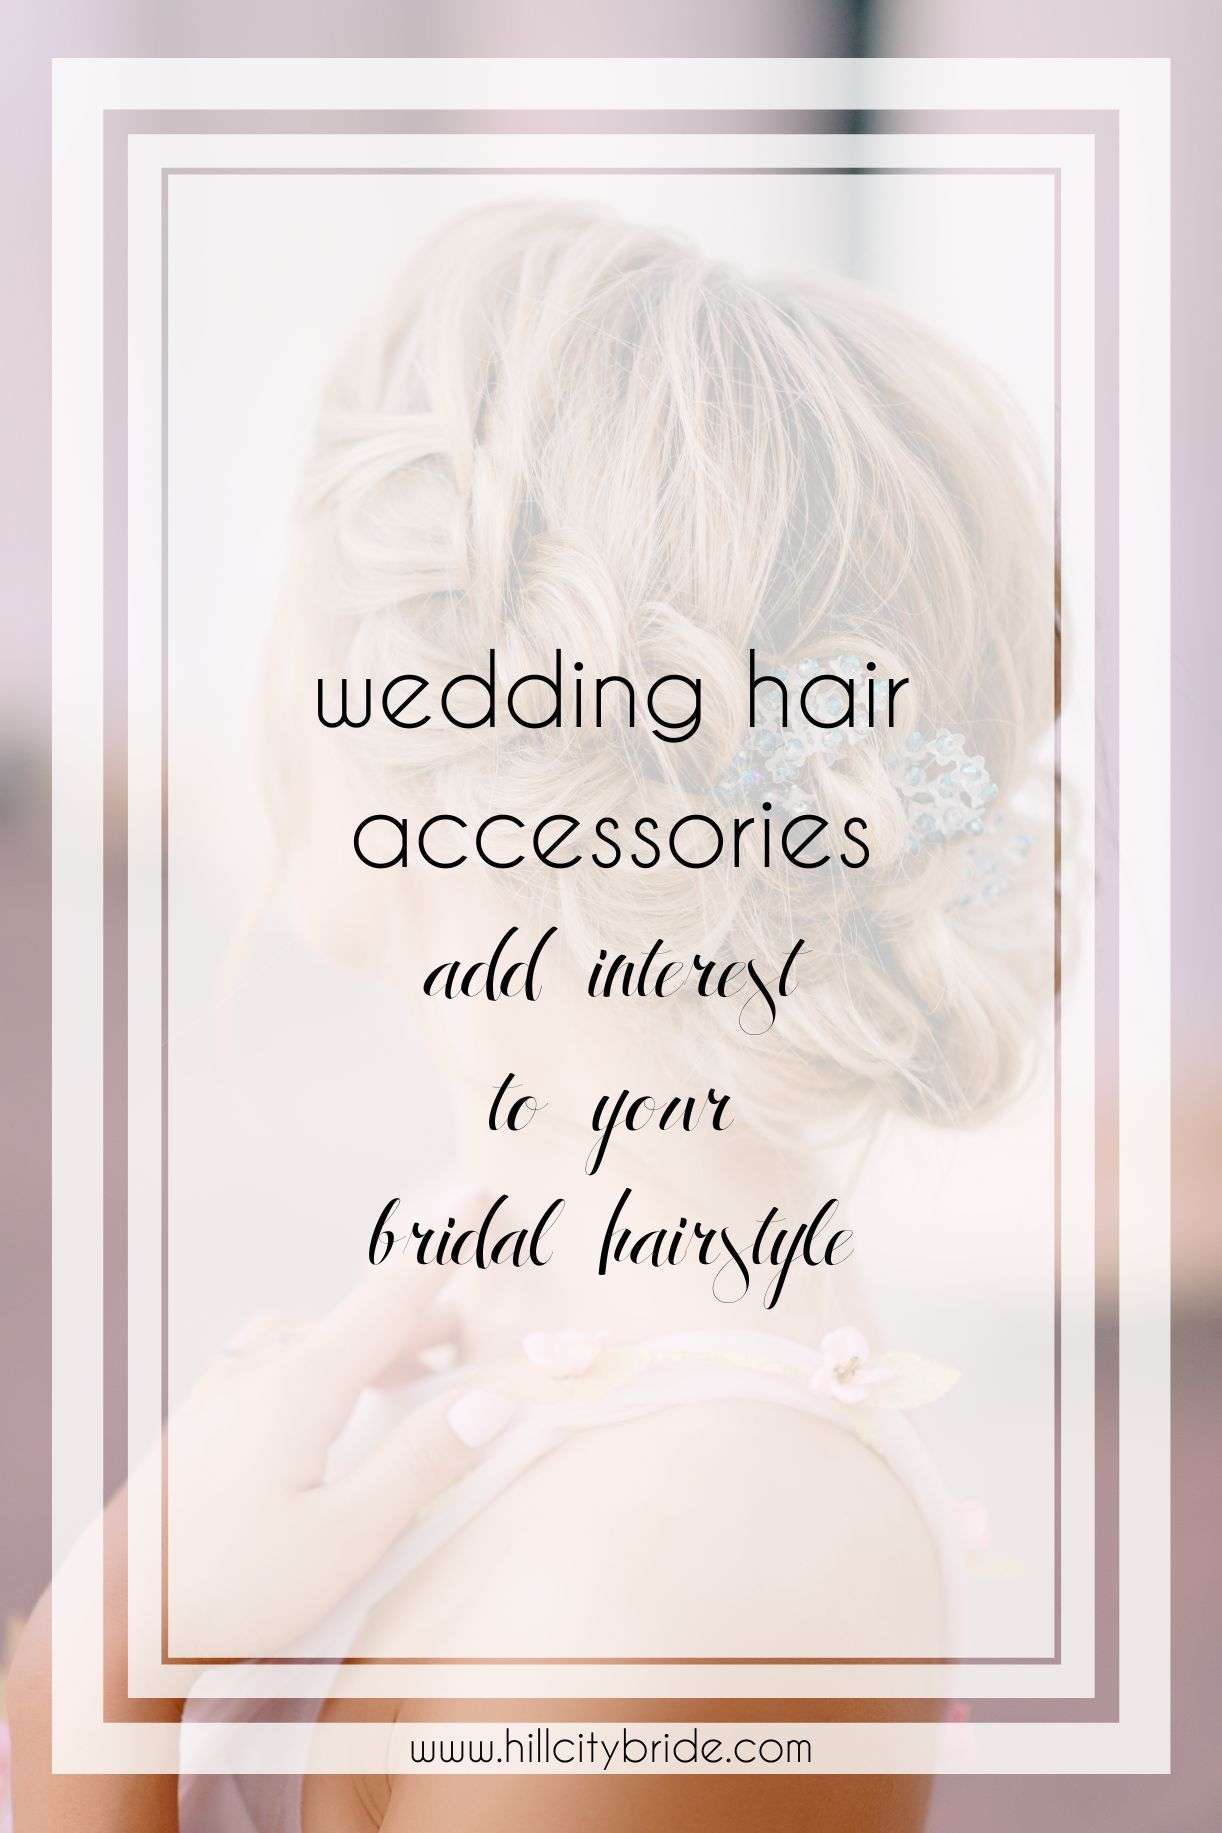 15 Perfect Wedding Hair Accessories to Complete Your Bridal Look